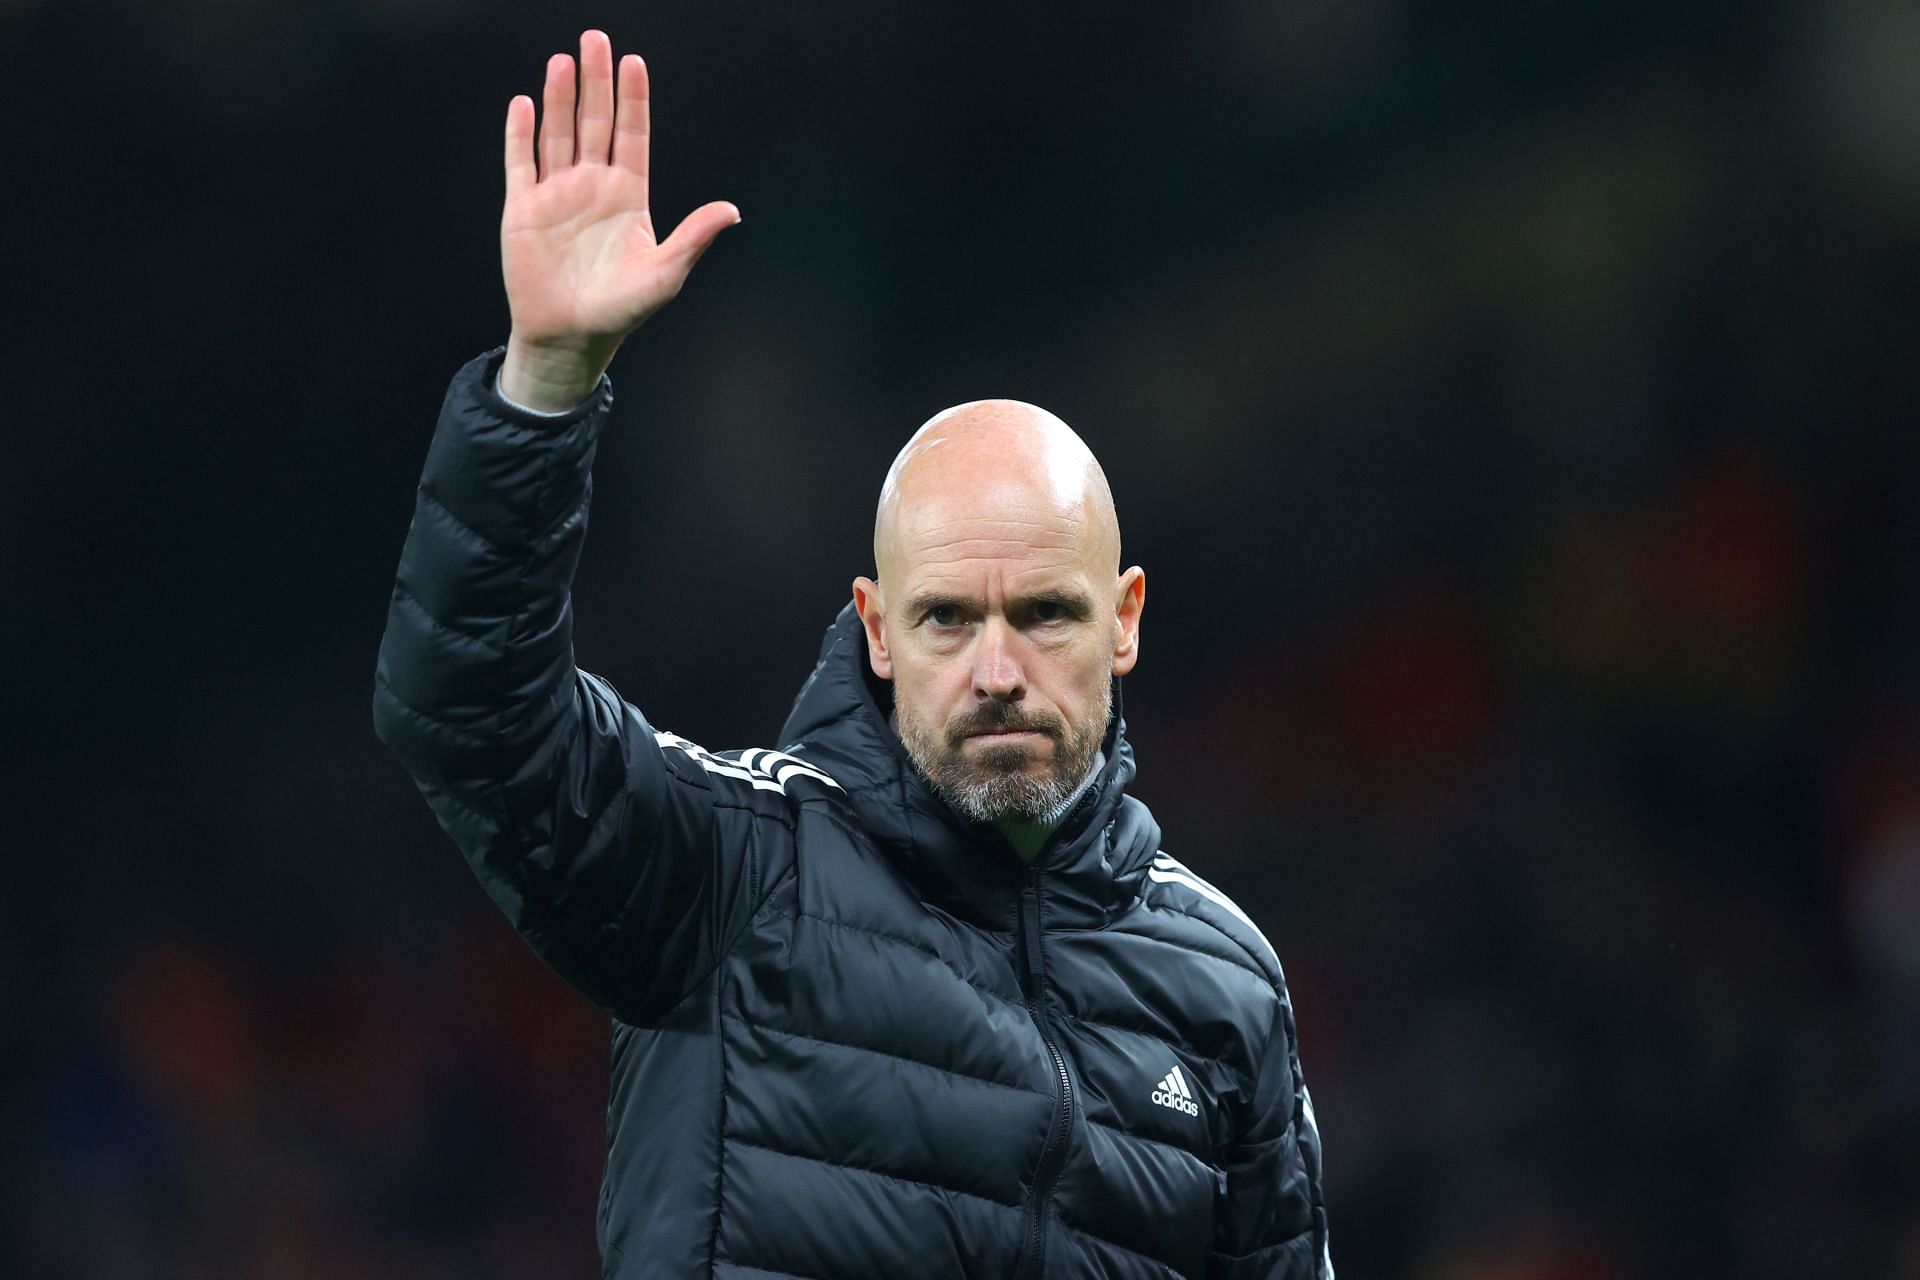 Ten Hag wanted to see his side score more